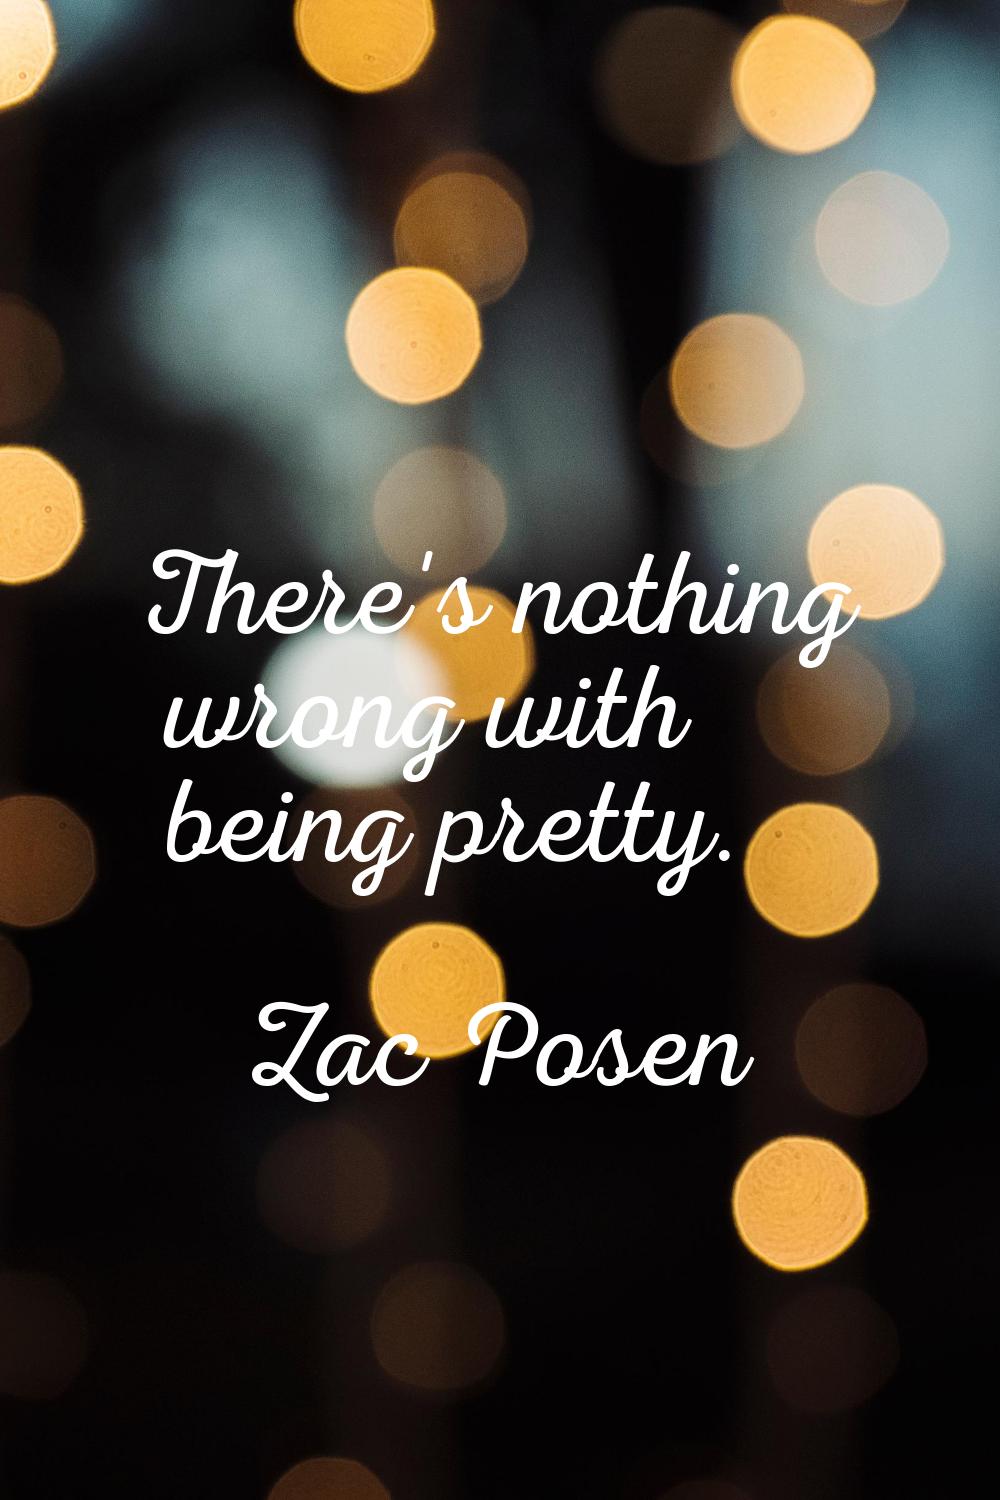 There's nothing wrong with being pretty.